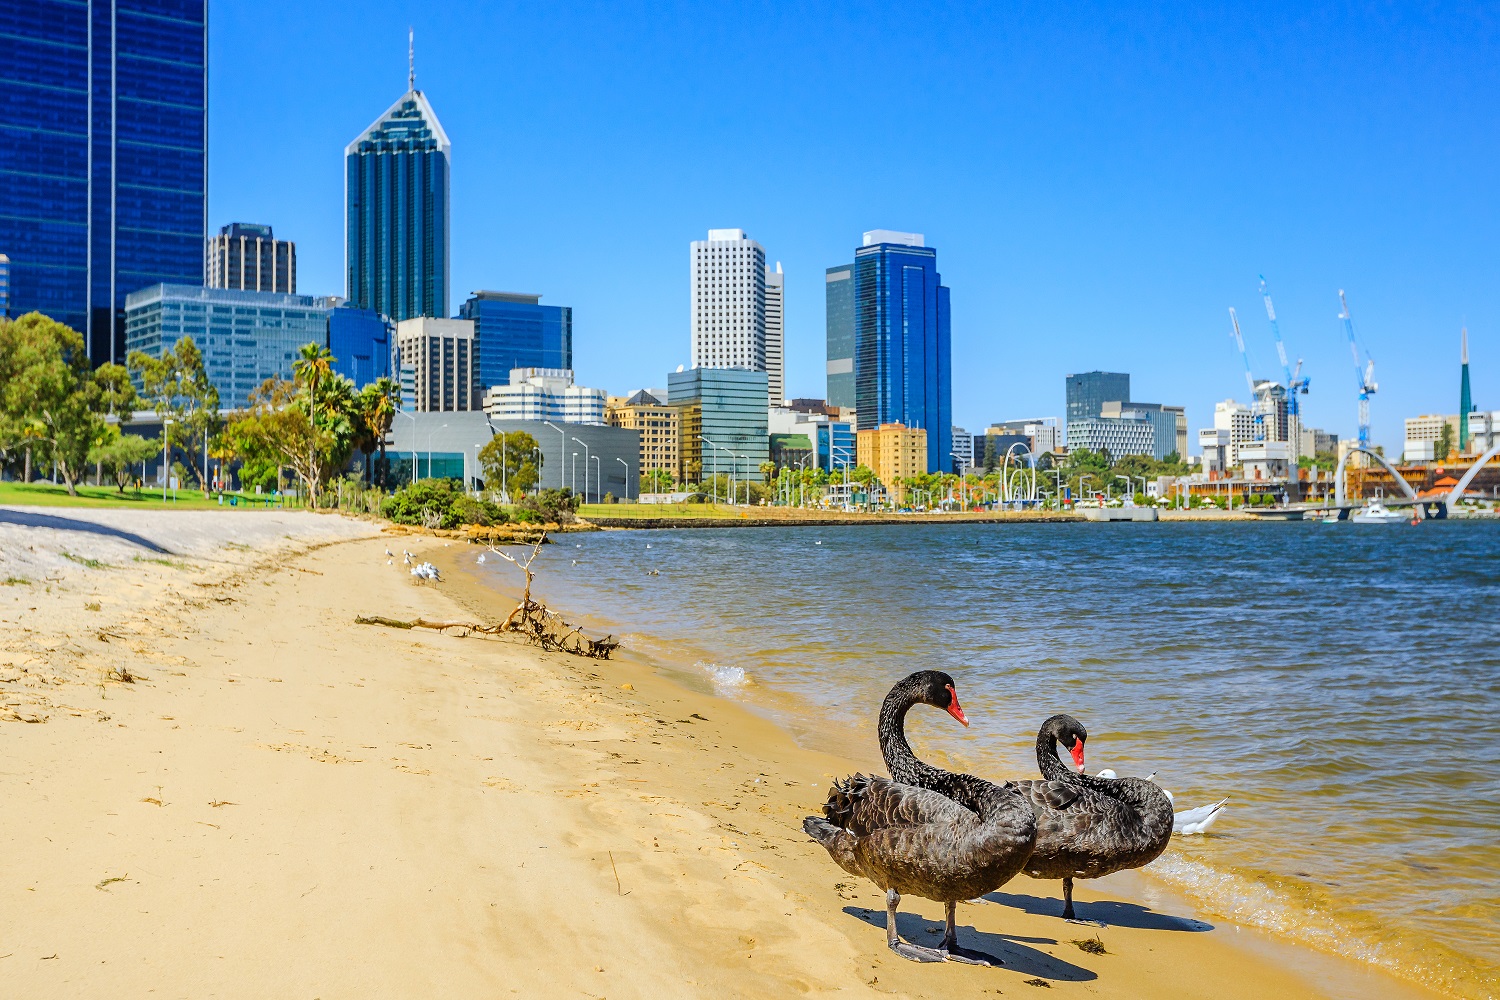 About Perth's Eastern Suburbs